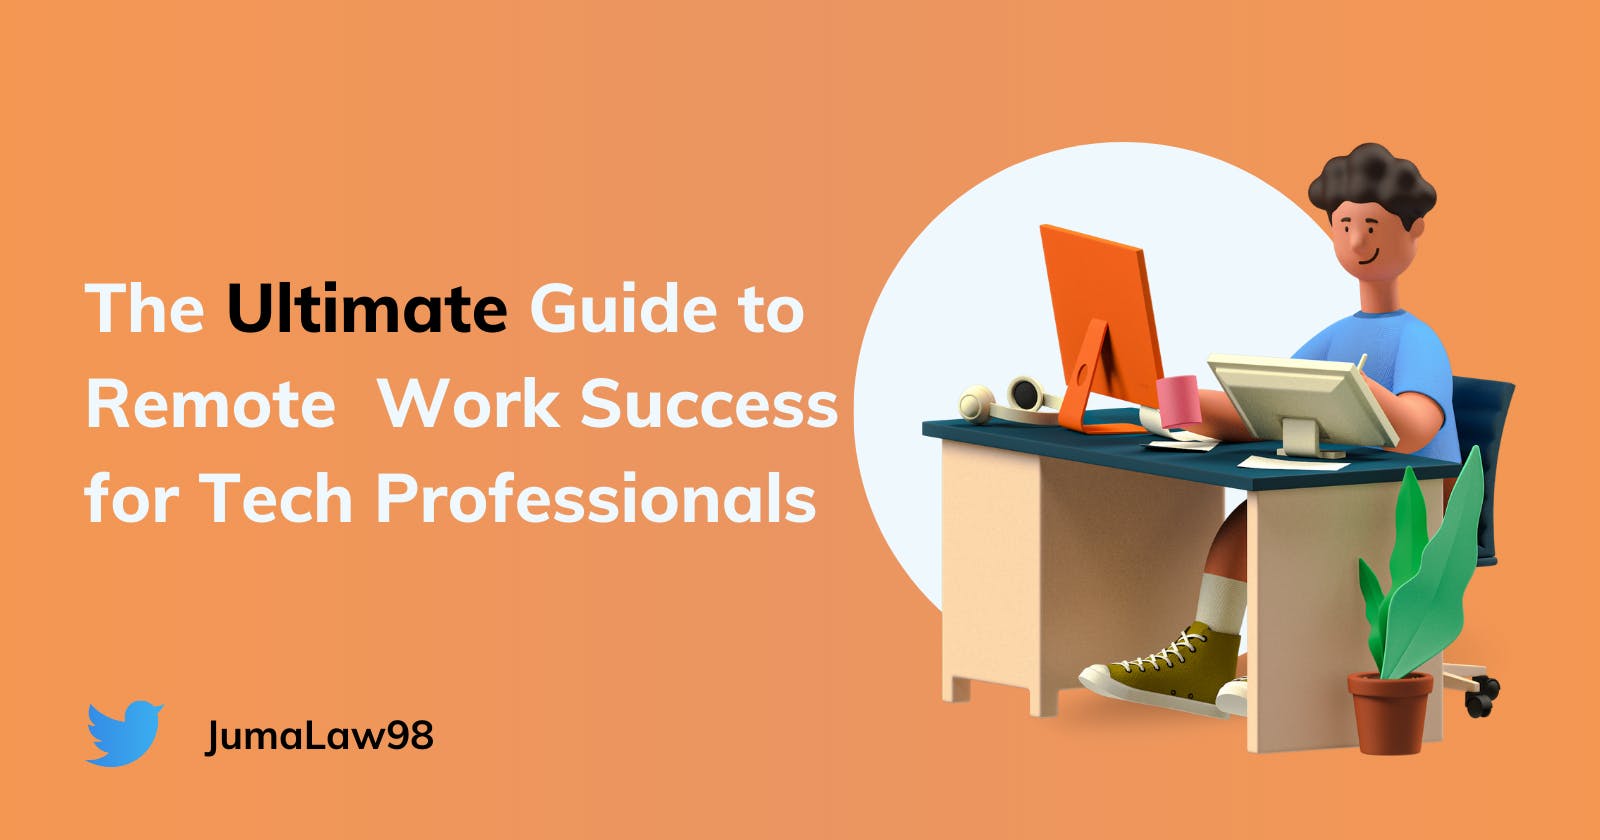 The Ultimate Guide to Remote Work Success for Tech Professionals